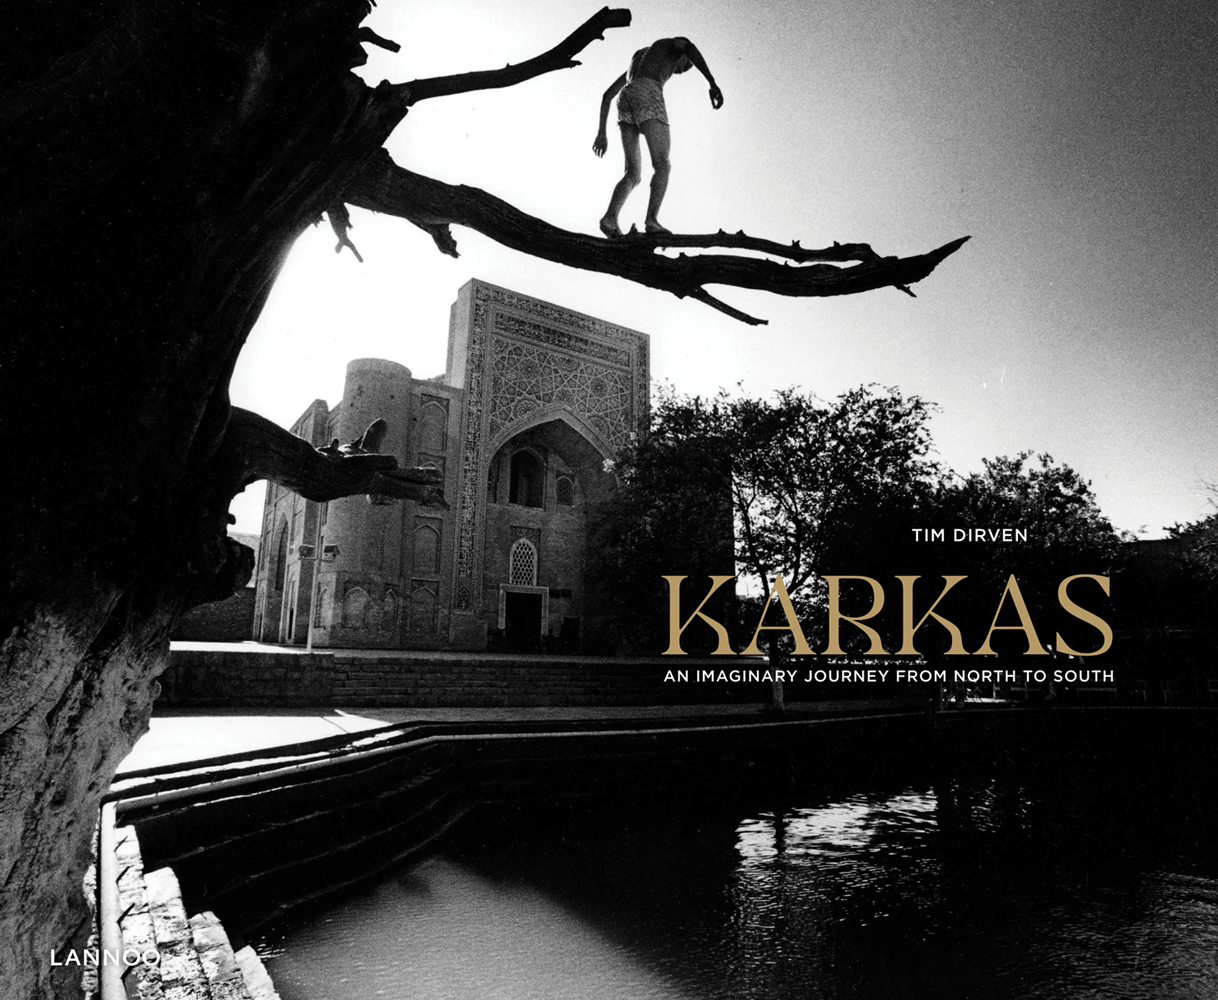 Figure standing on bare tree branch over pool, temple building behind, on cover of 'Karkas - Tim Dirven, An Imaginary Journey from North to South', by Lannoo Publishers.